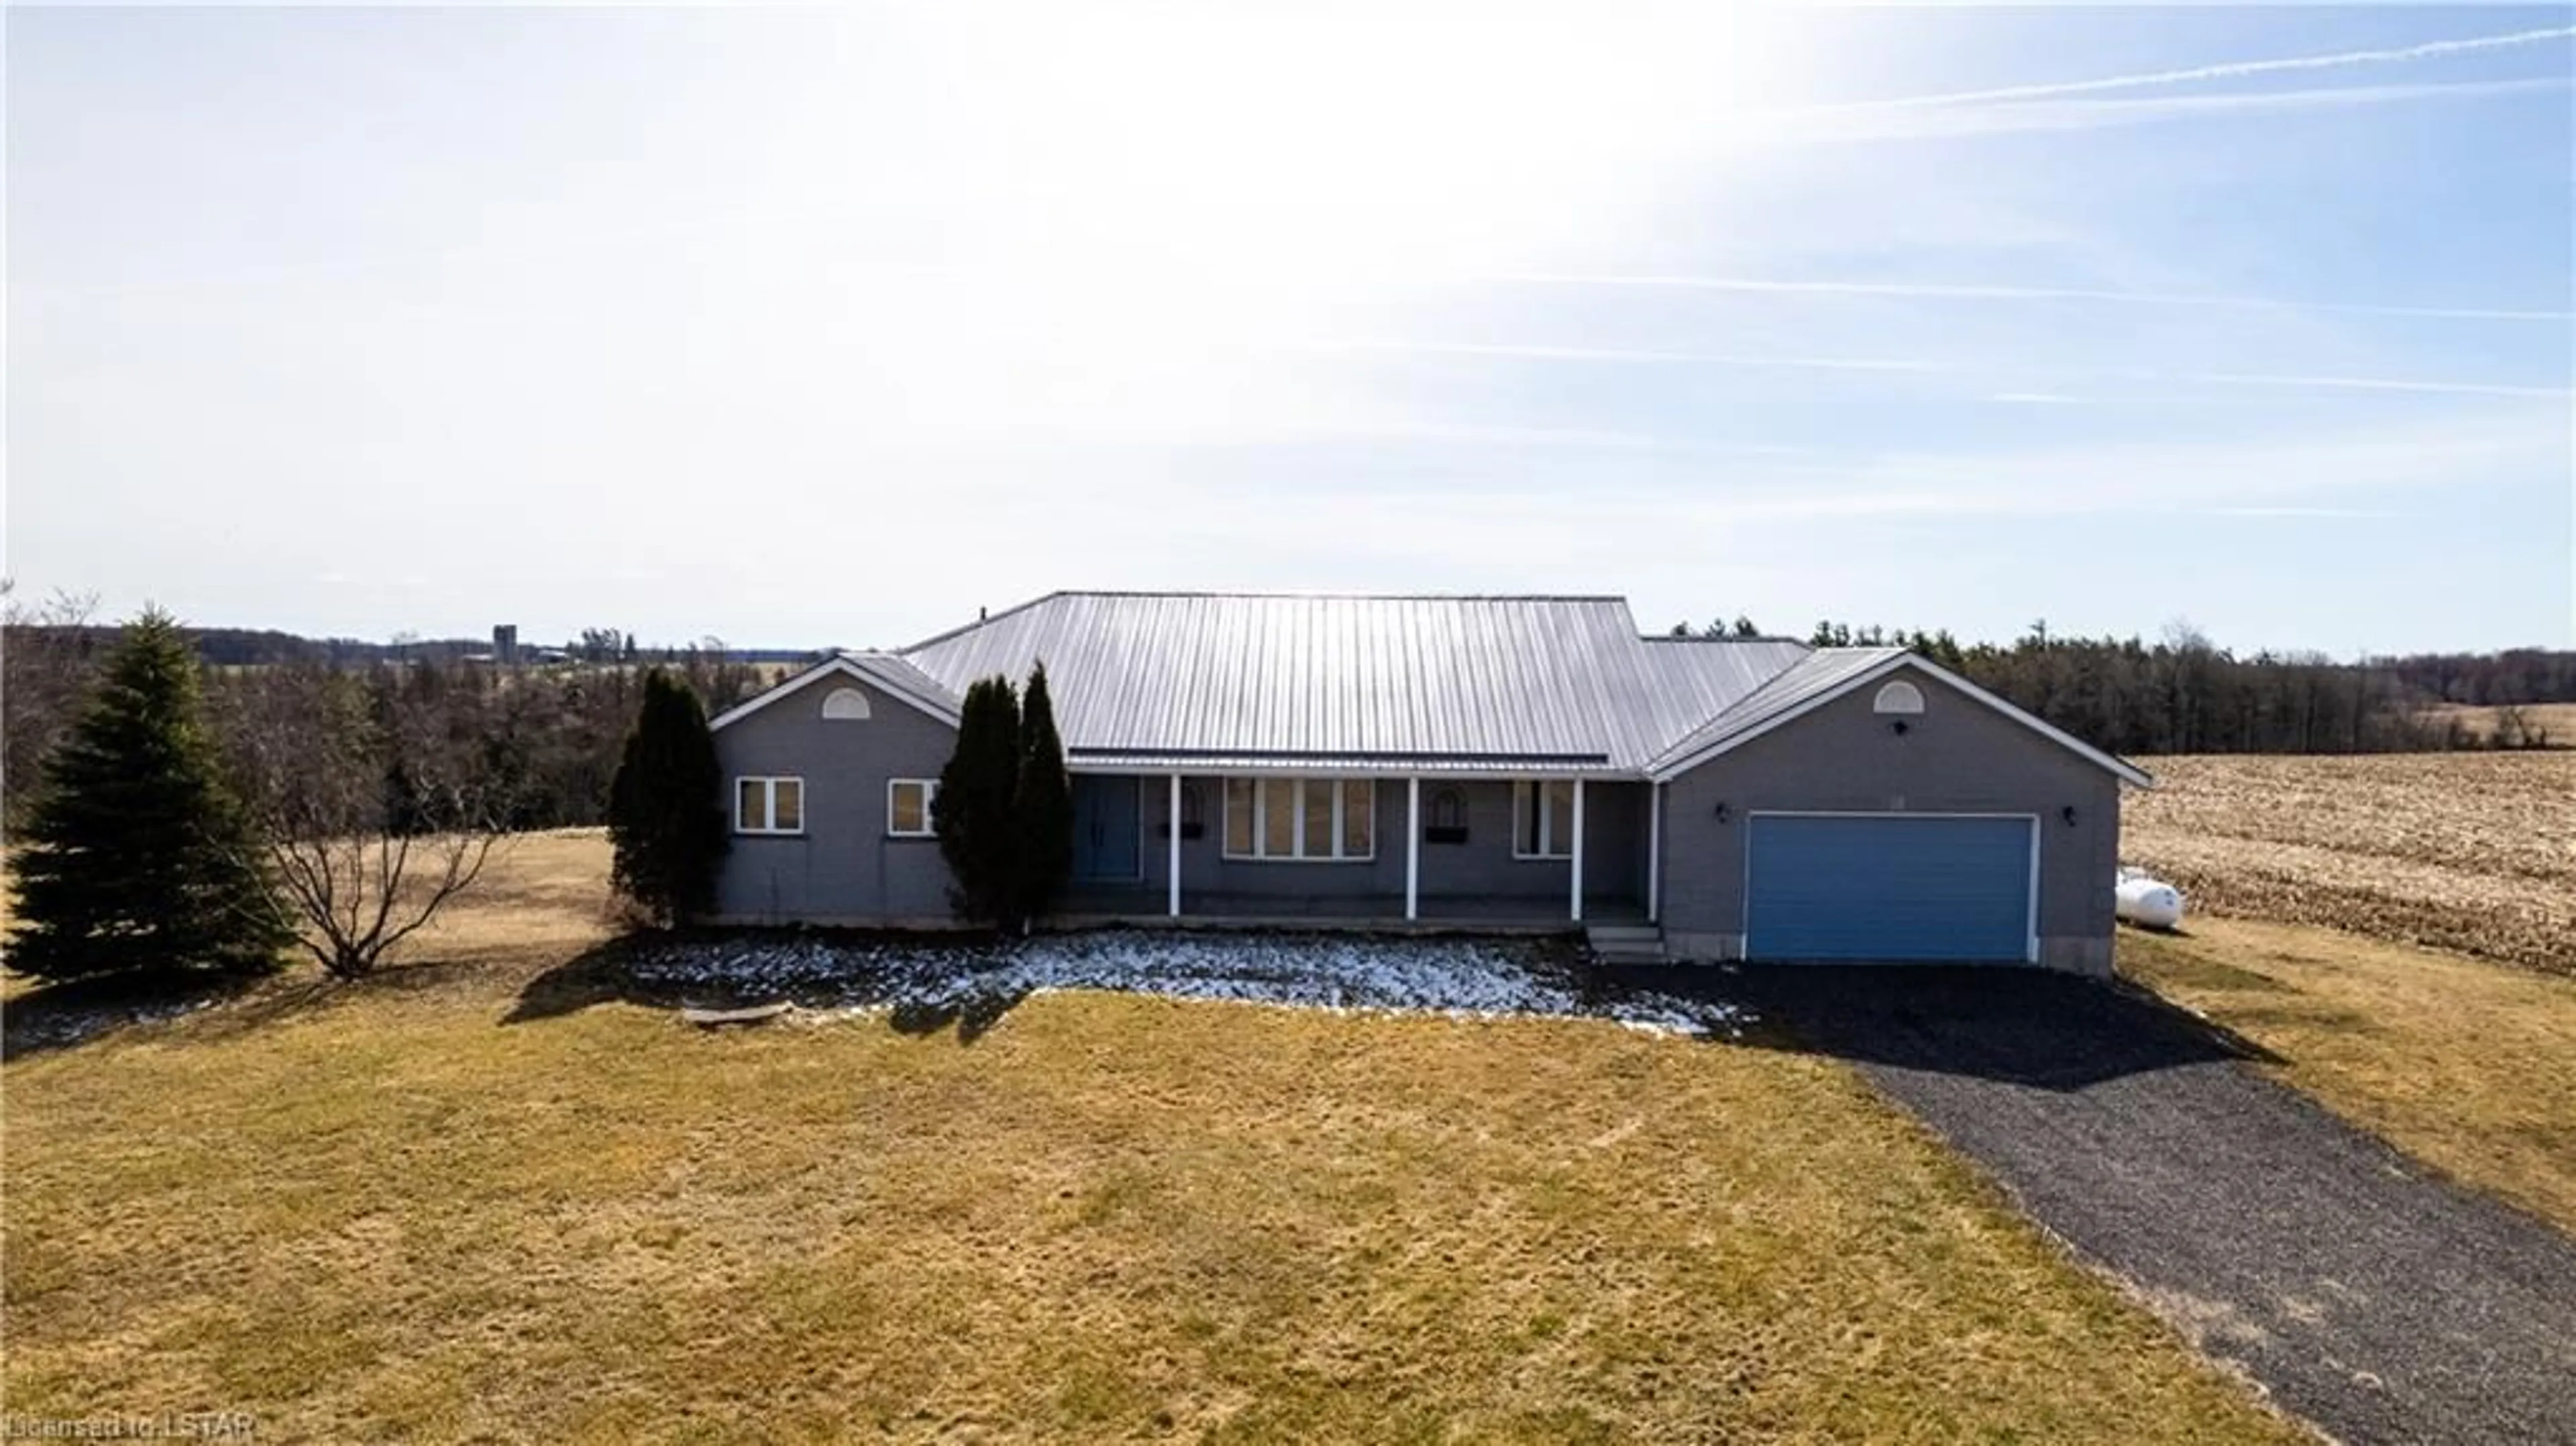 Frontside or backside of a home for 786660 Township Road 6, Drumbo Ontario N0J 1G0